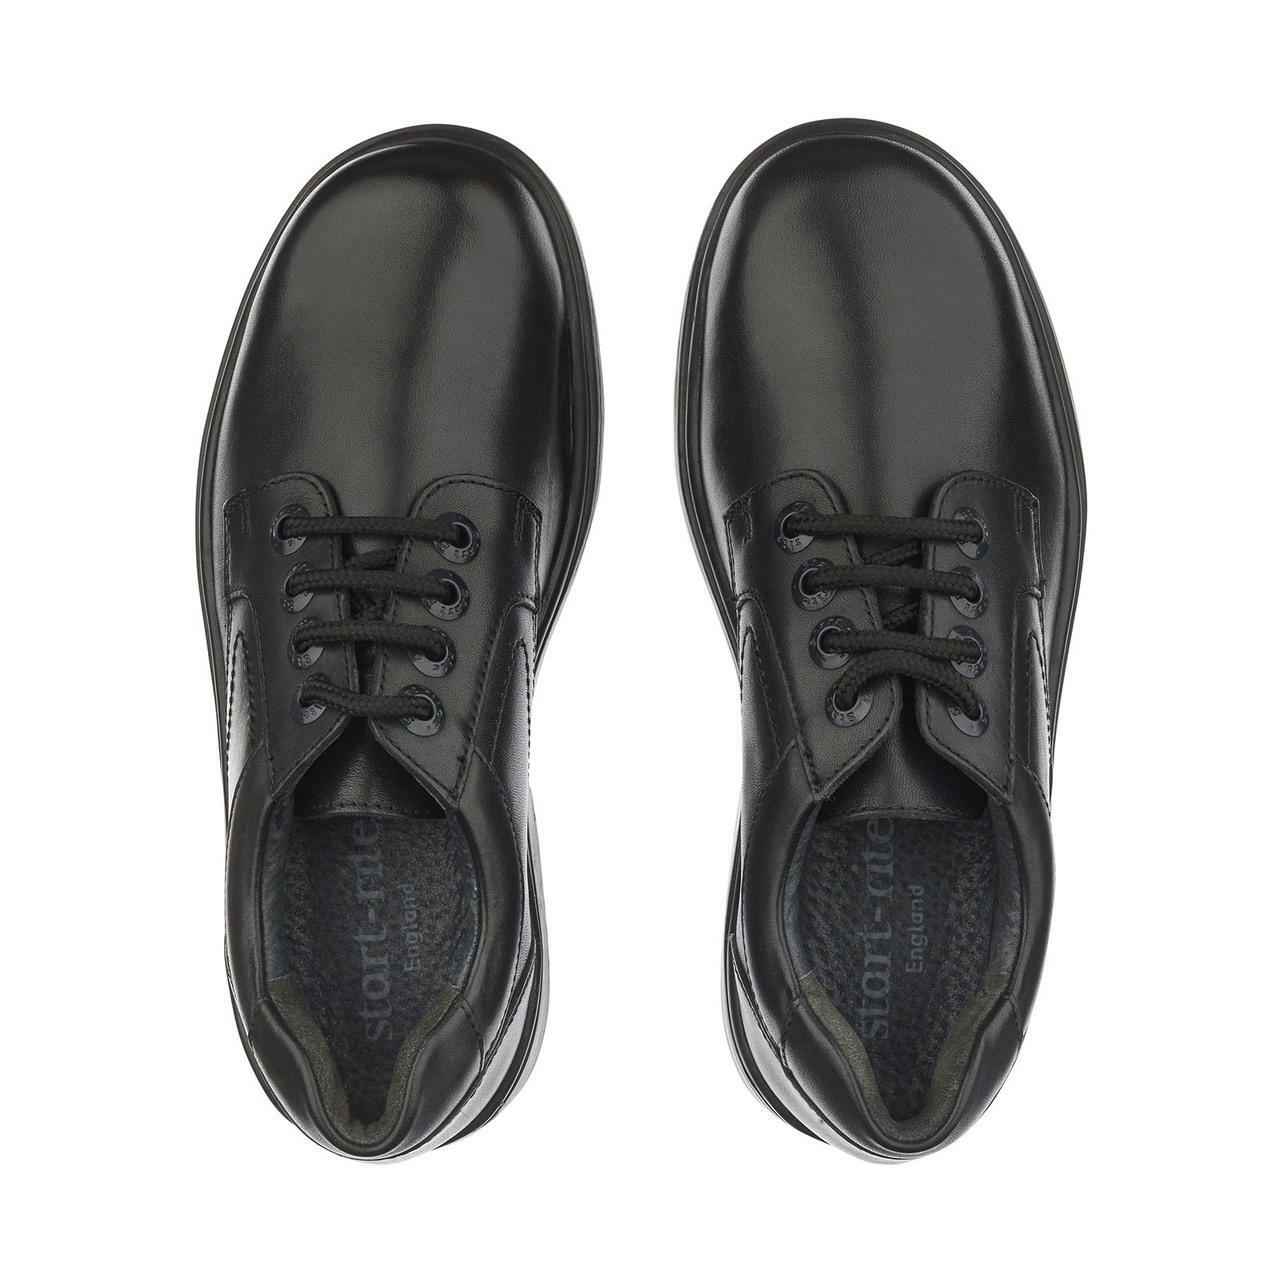 A pair of boys school shoes by Start Rite,style Isaac, in black leather with lace up fastening. Top view.